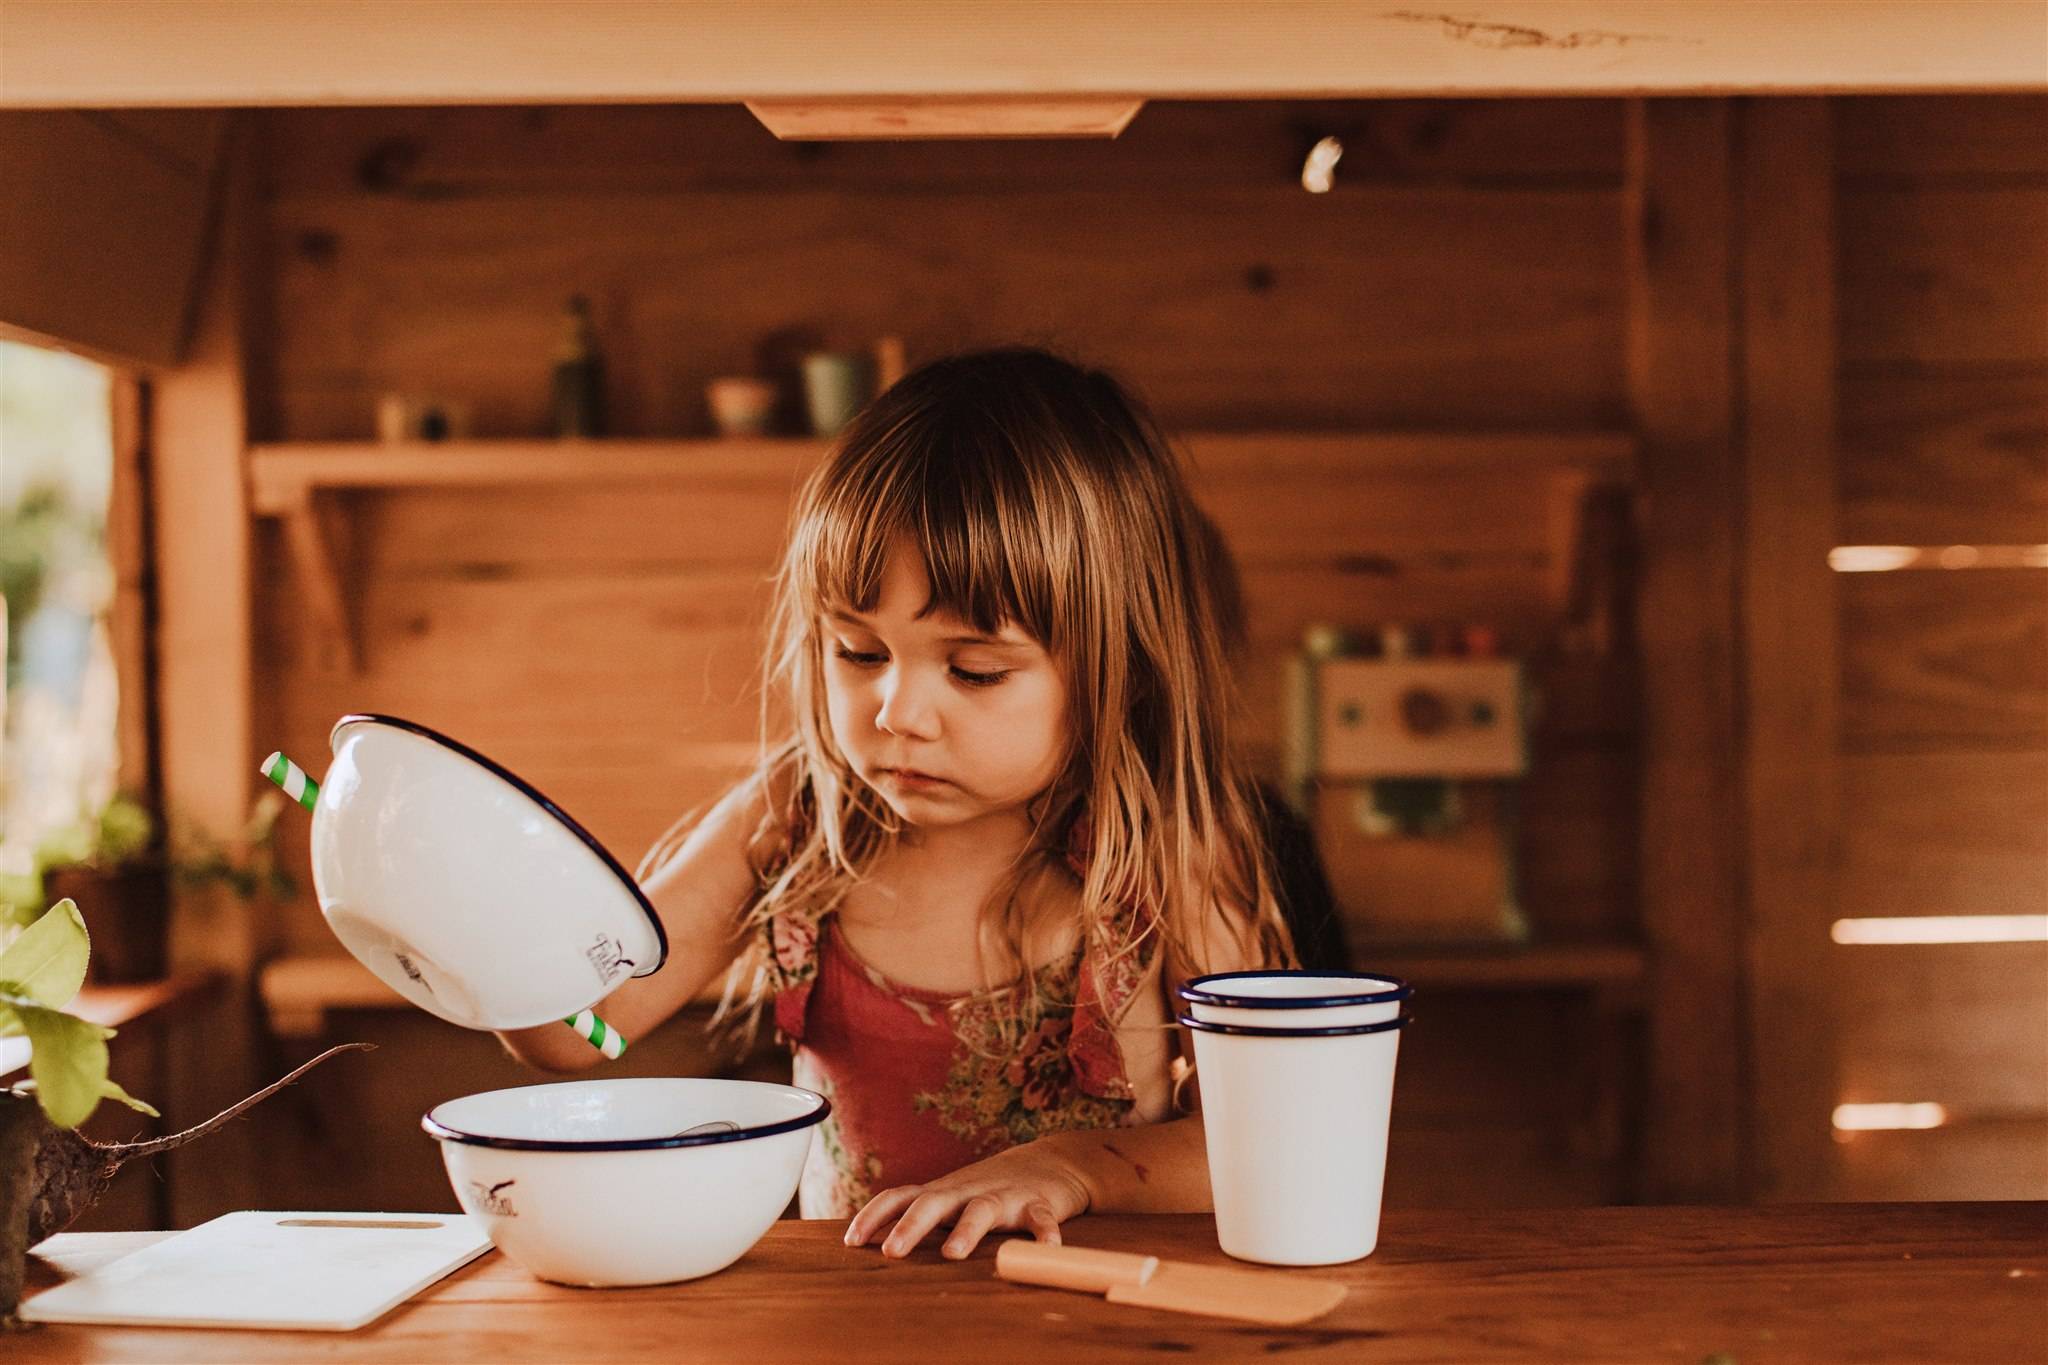 A girl playing with bowls and cups in a cubby house